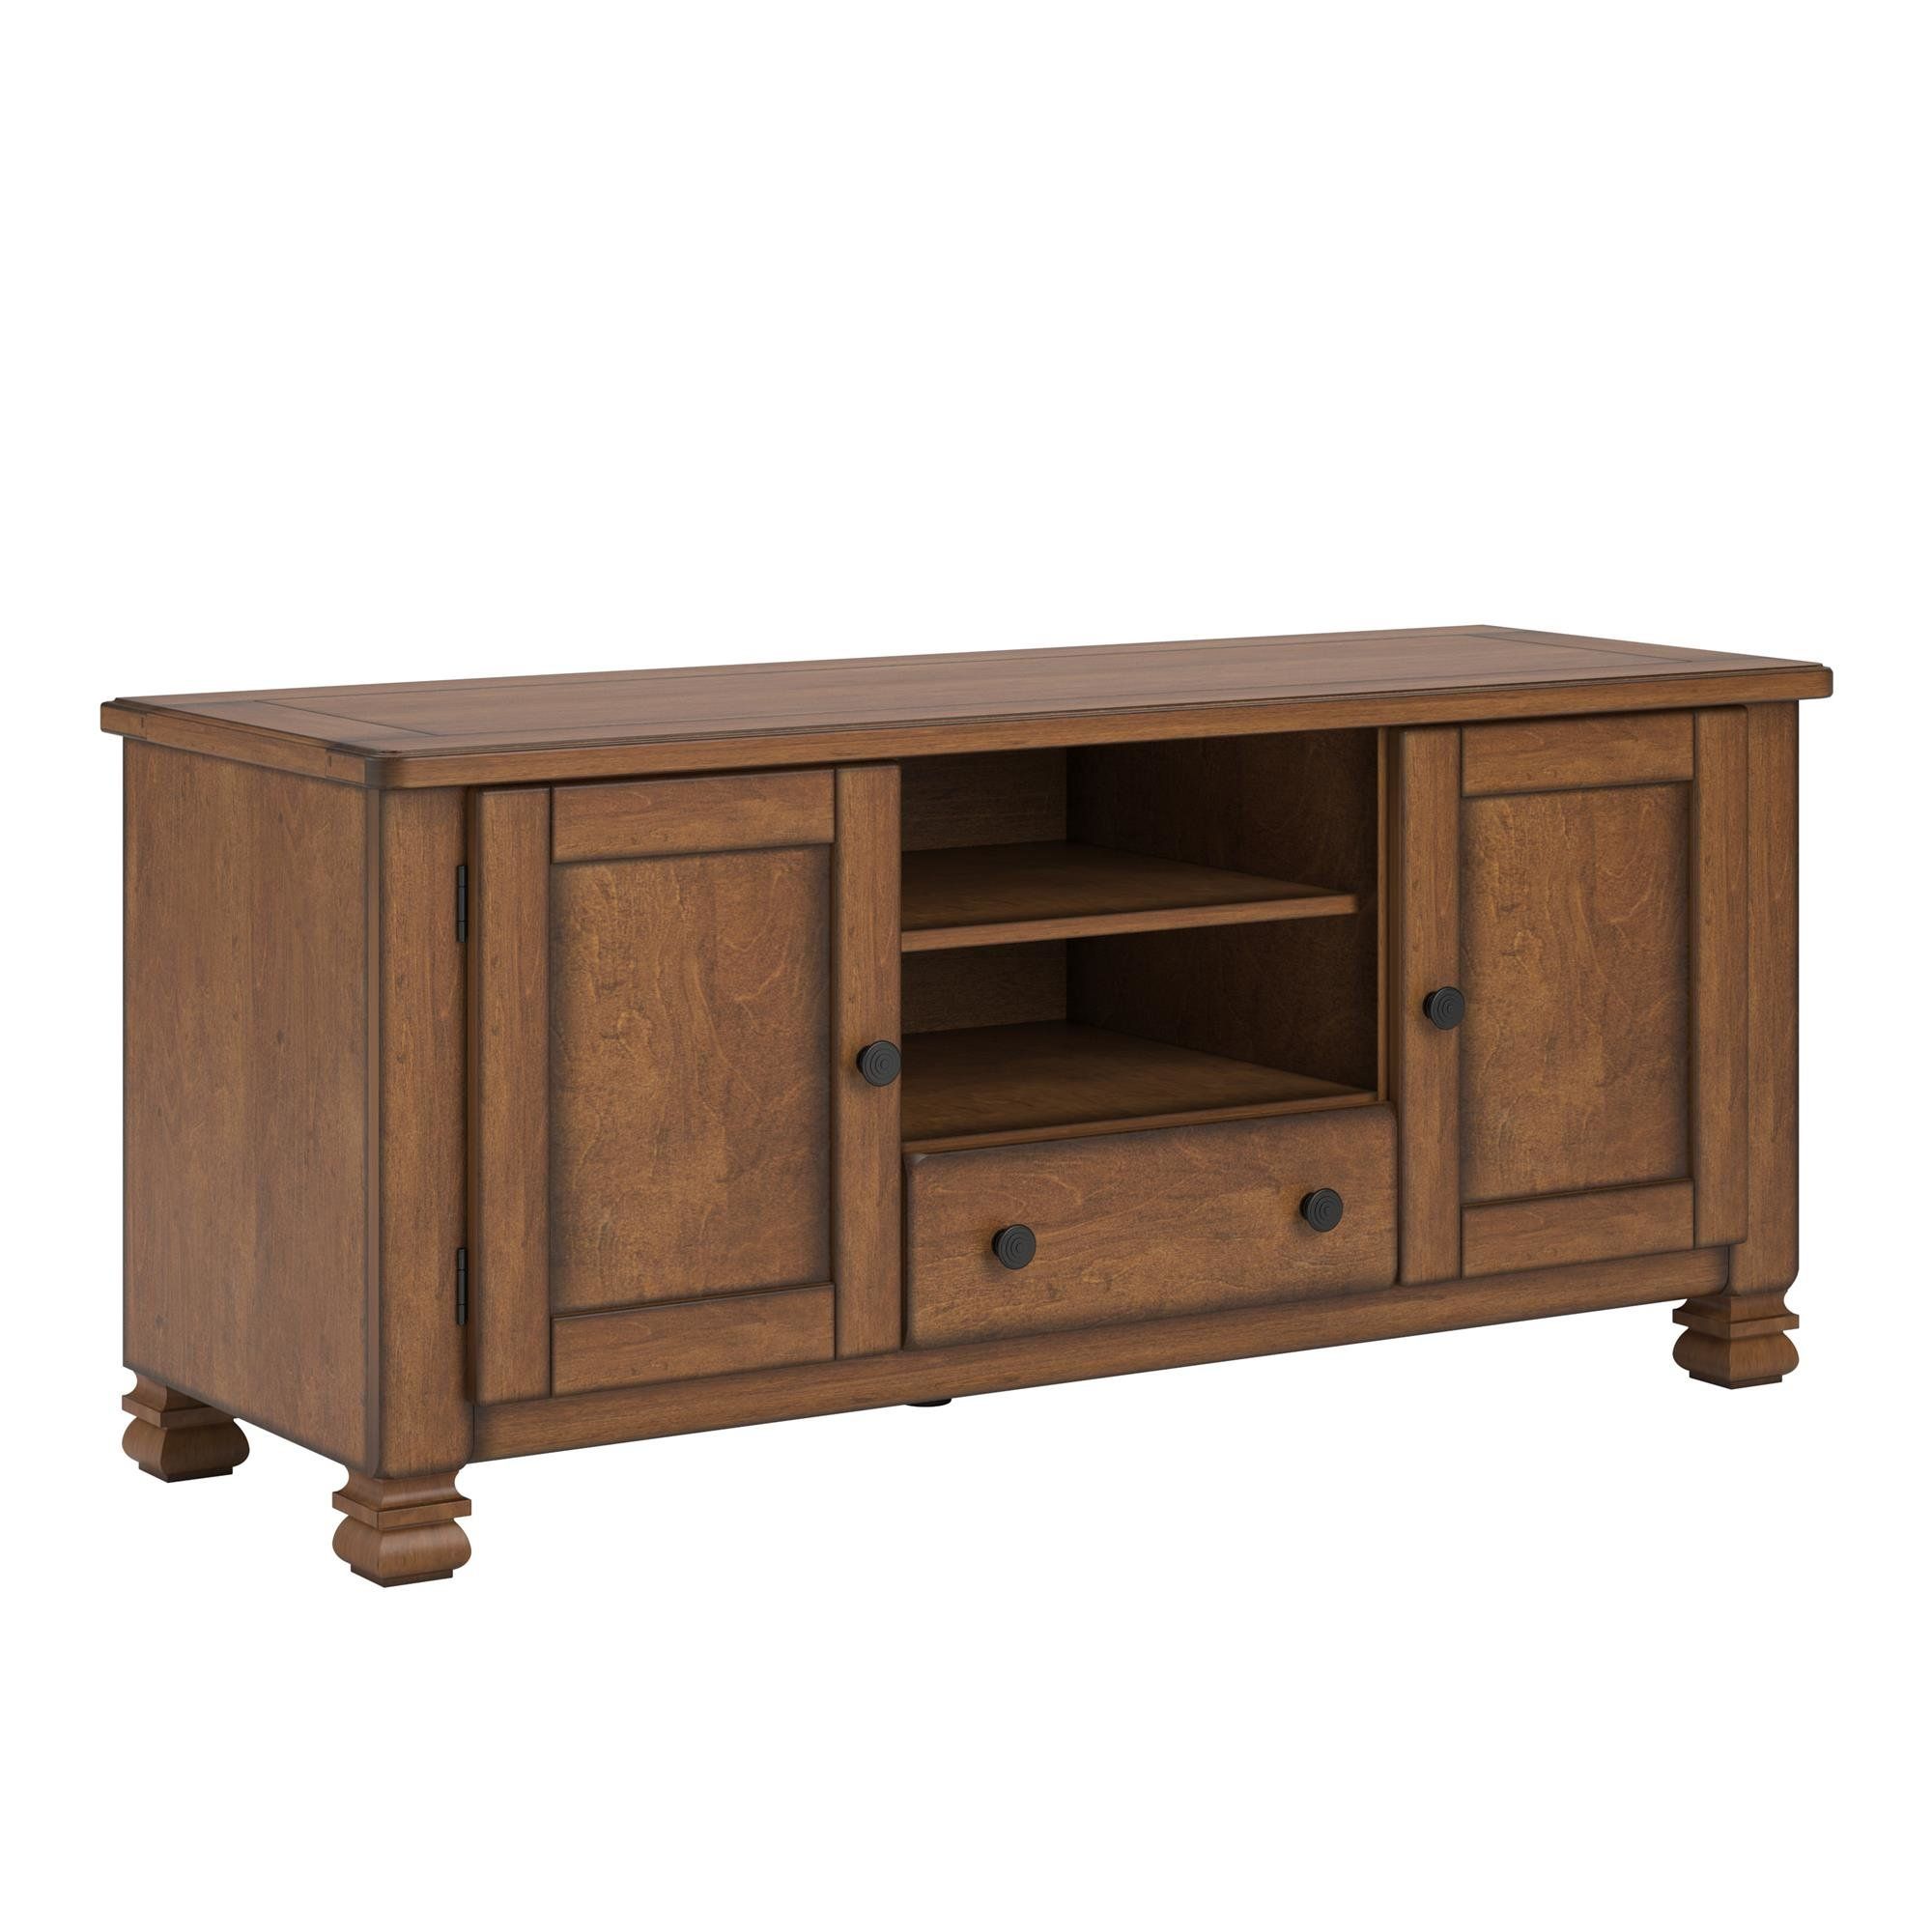 Tv Stands | Joss & Main With Regard To Annabelle Blue 70 Inch Tv Stands (View 5 of 30)